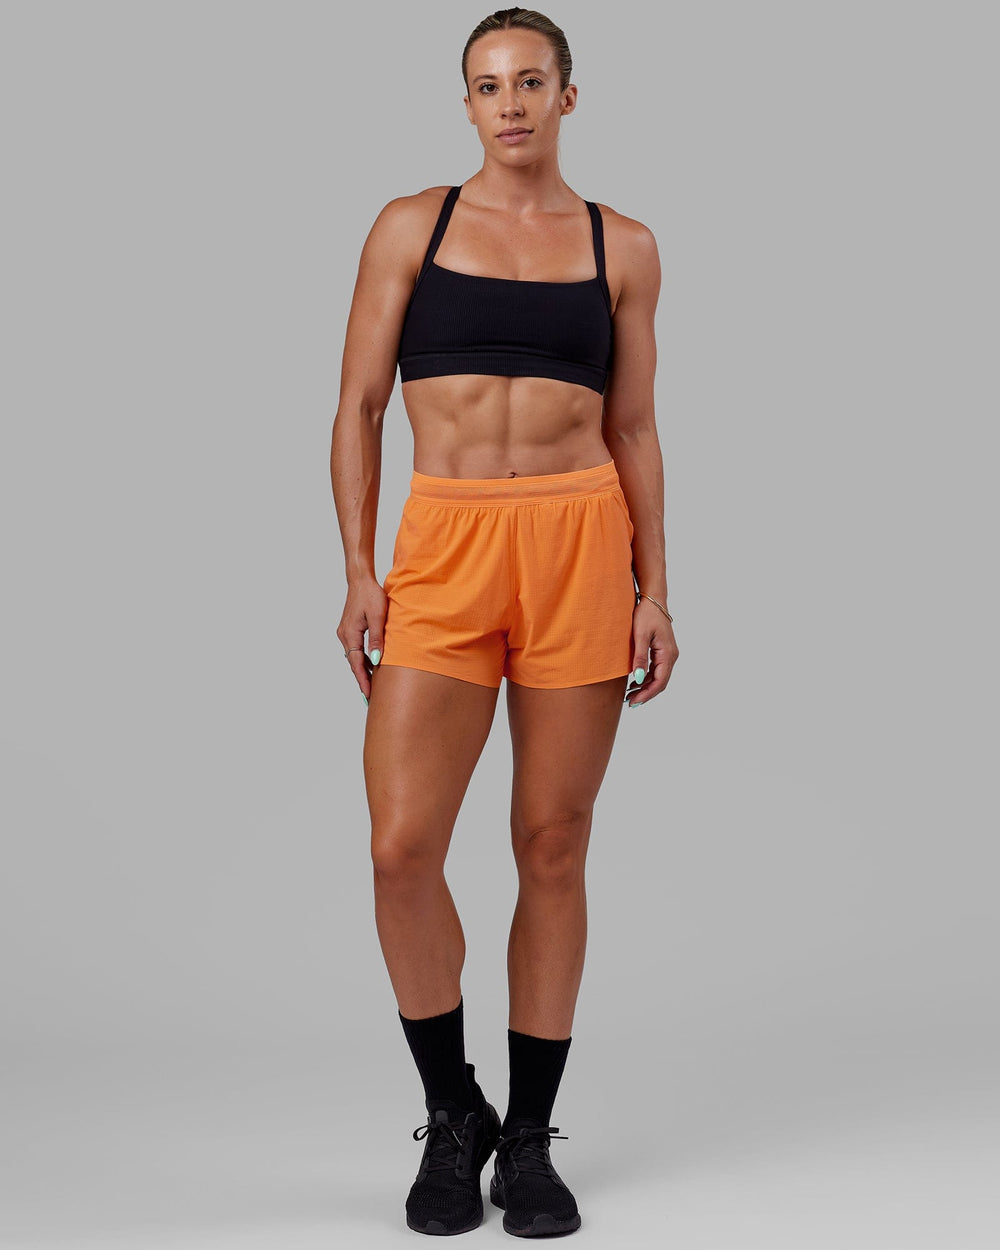 Woman wearing Ultra Air Lined Performance Short - Nectarine